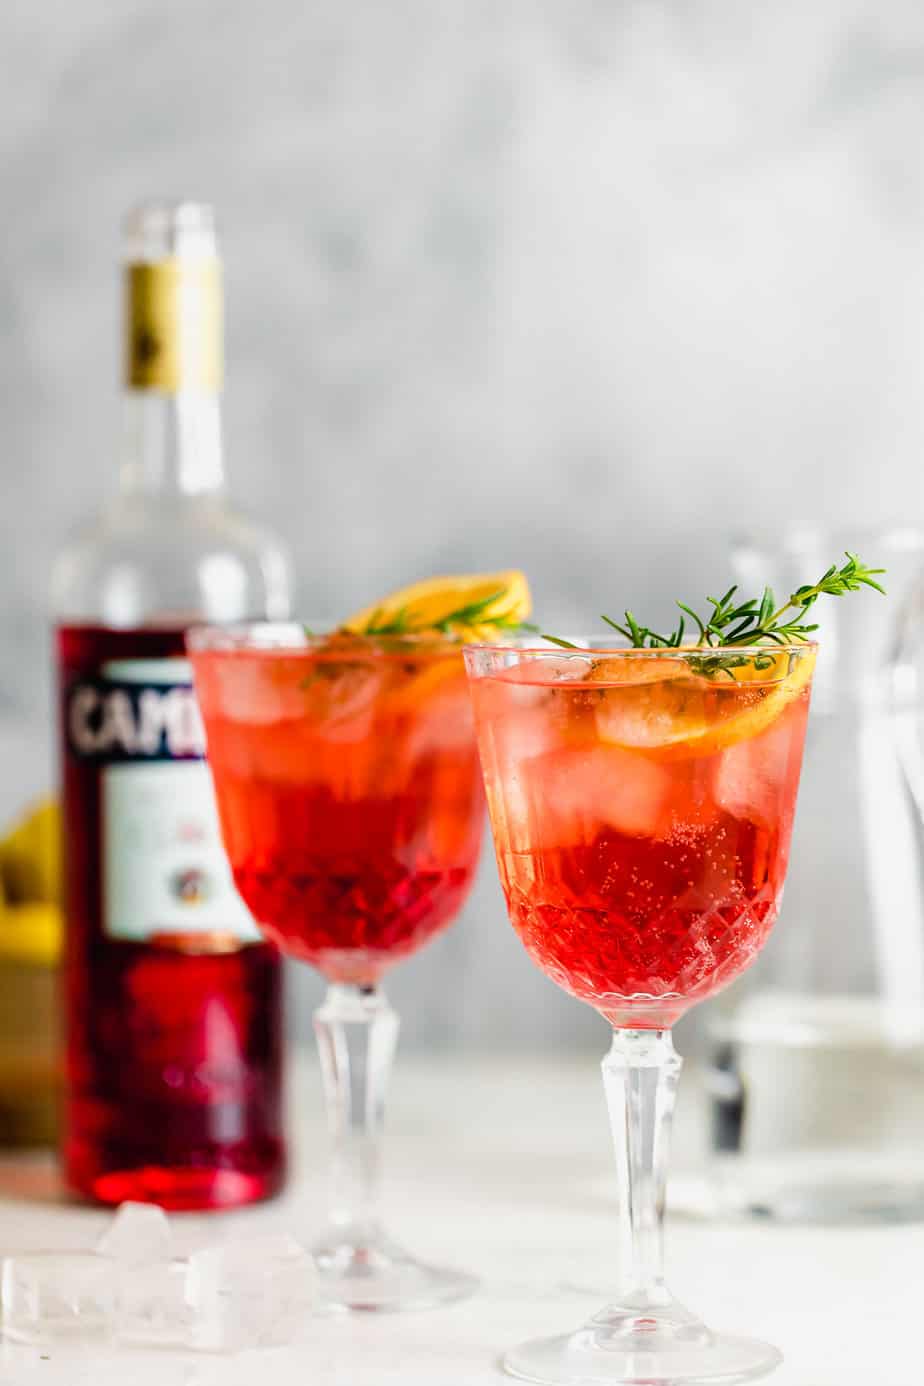 A classic Italian campari spritz cocktail on grey background with red campari bottle